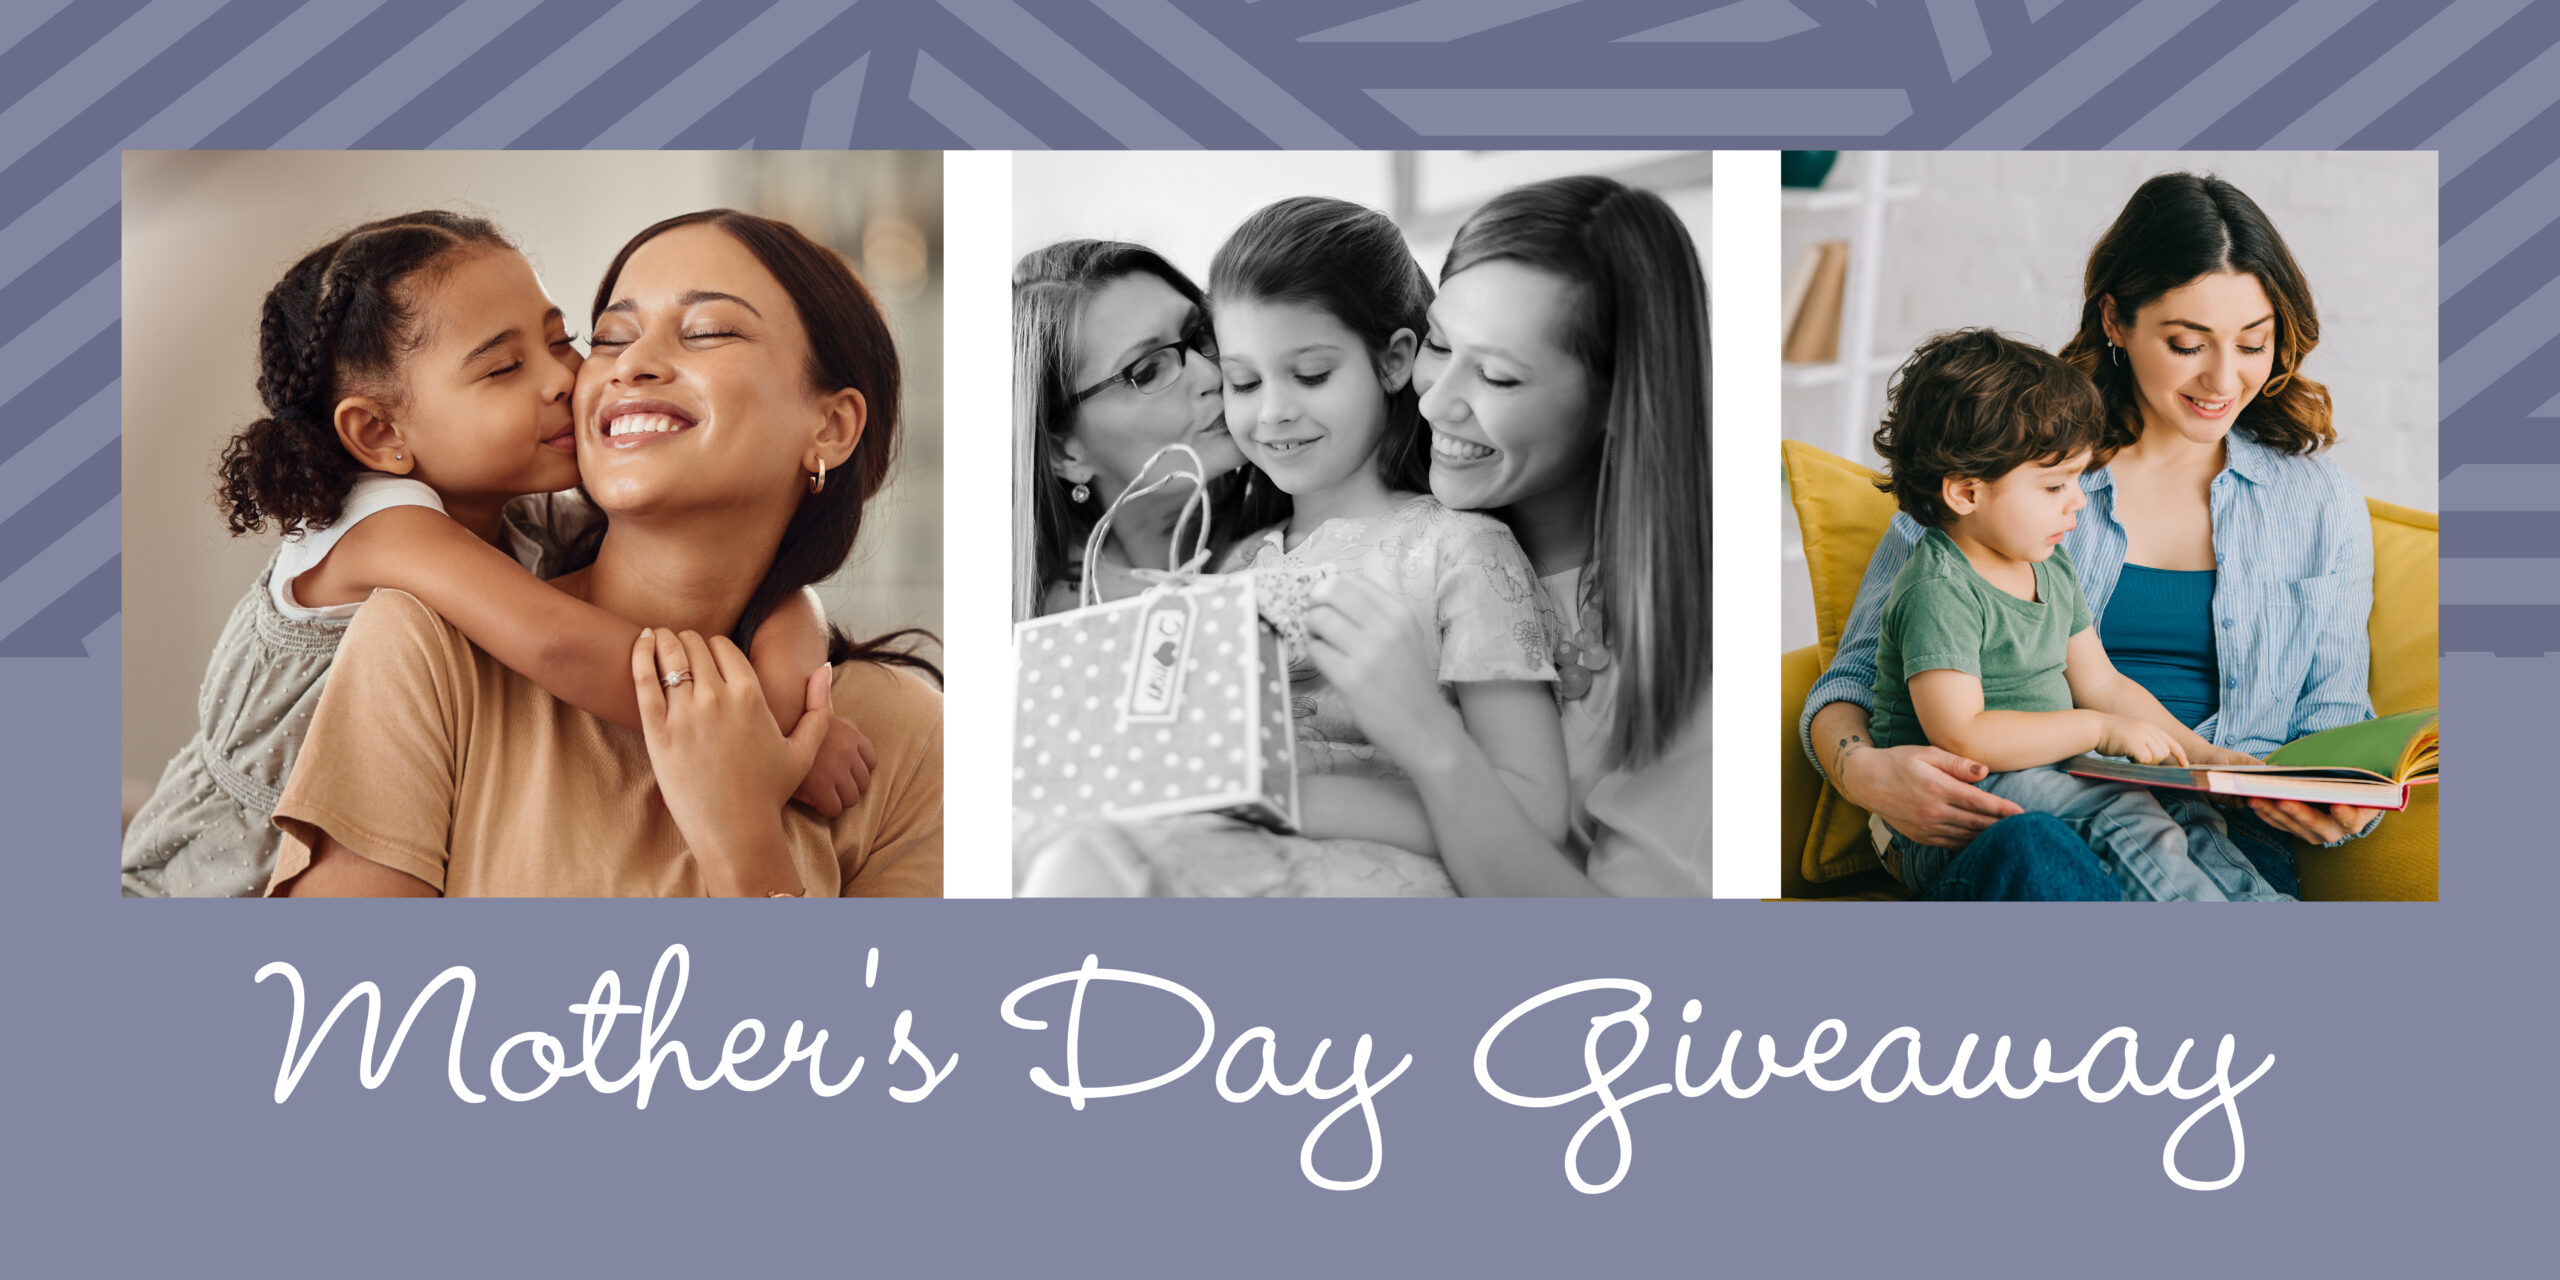 Mother's Day Giveaway Pictures of different moms with their children